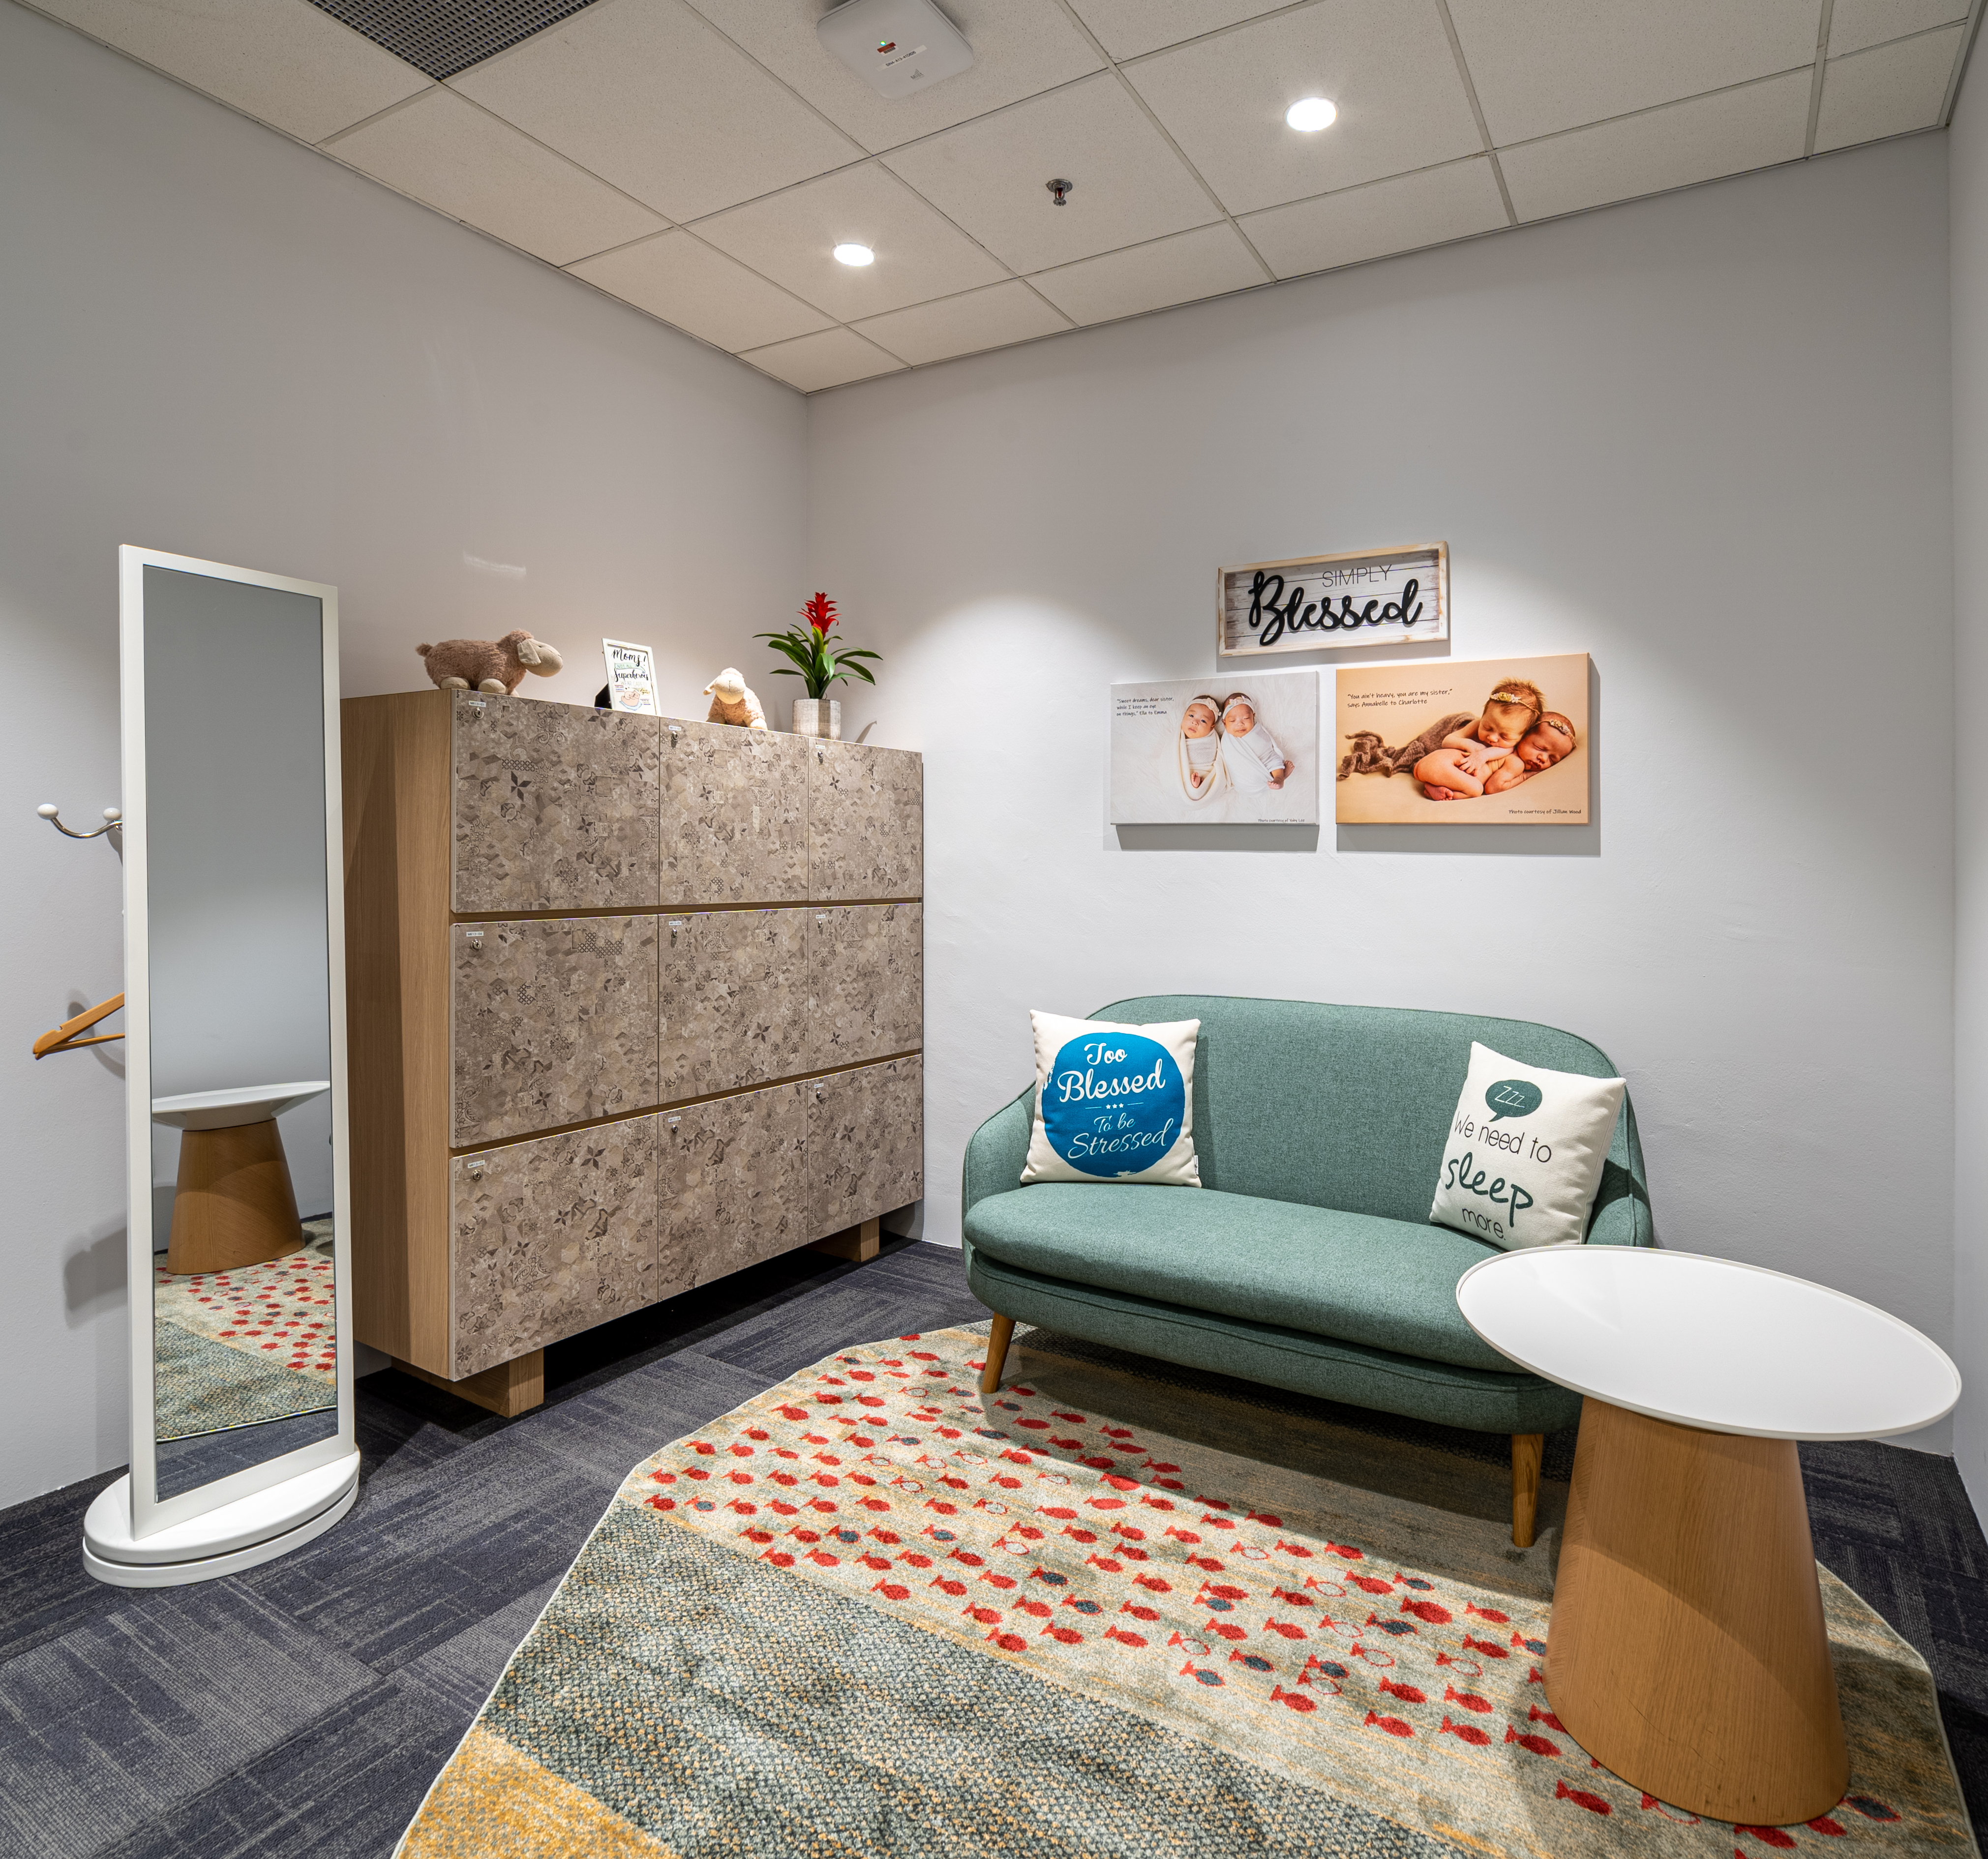 Space Matrix’s recent workspace for a multinational company features comfortable, cosy mother’s rooms to make the return to work easier